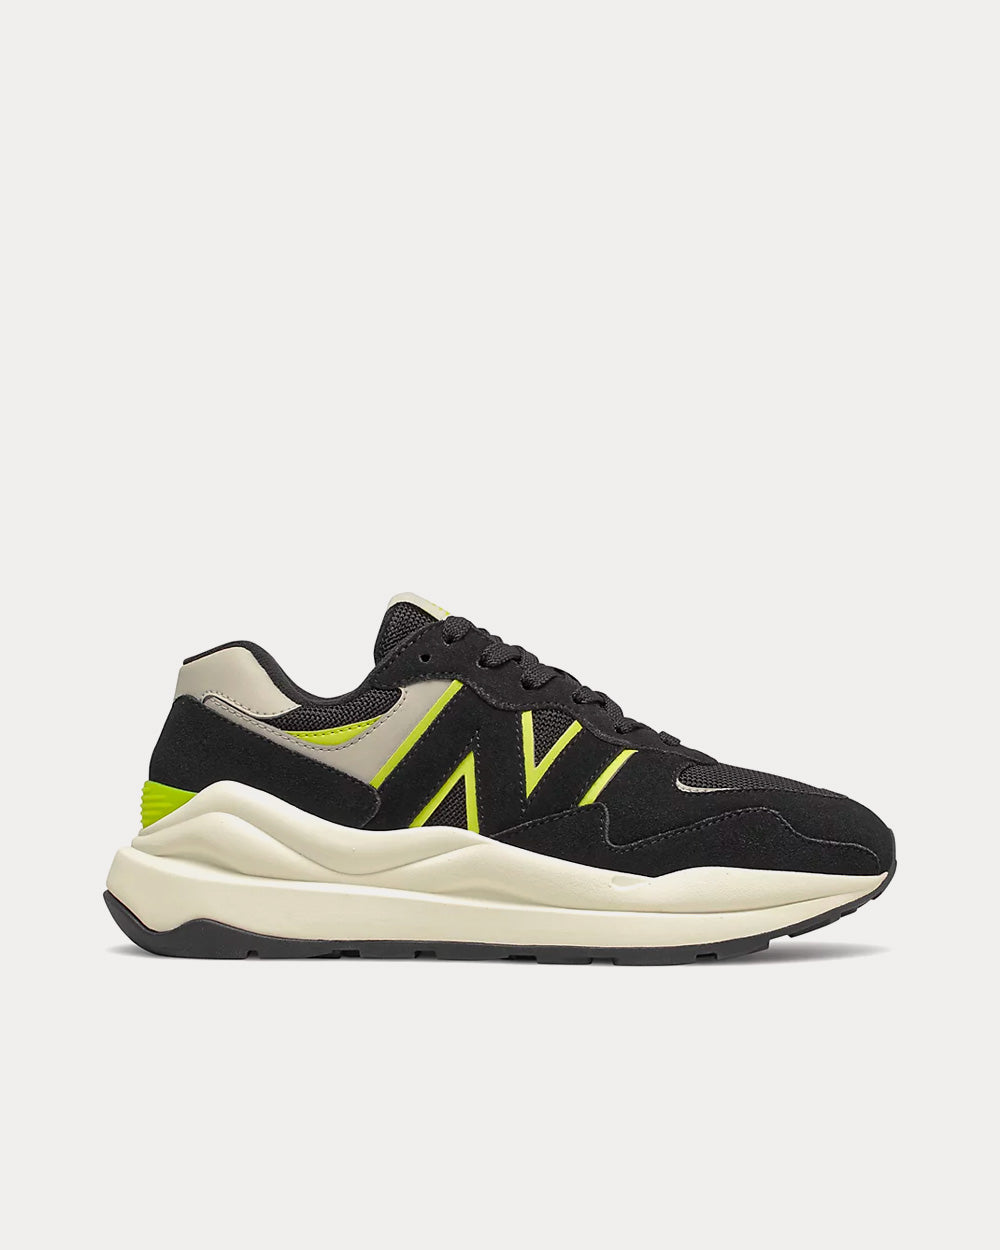 New Balance - 57/40 Black with Oyster Pink Low Top Sneakers